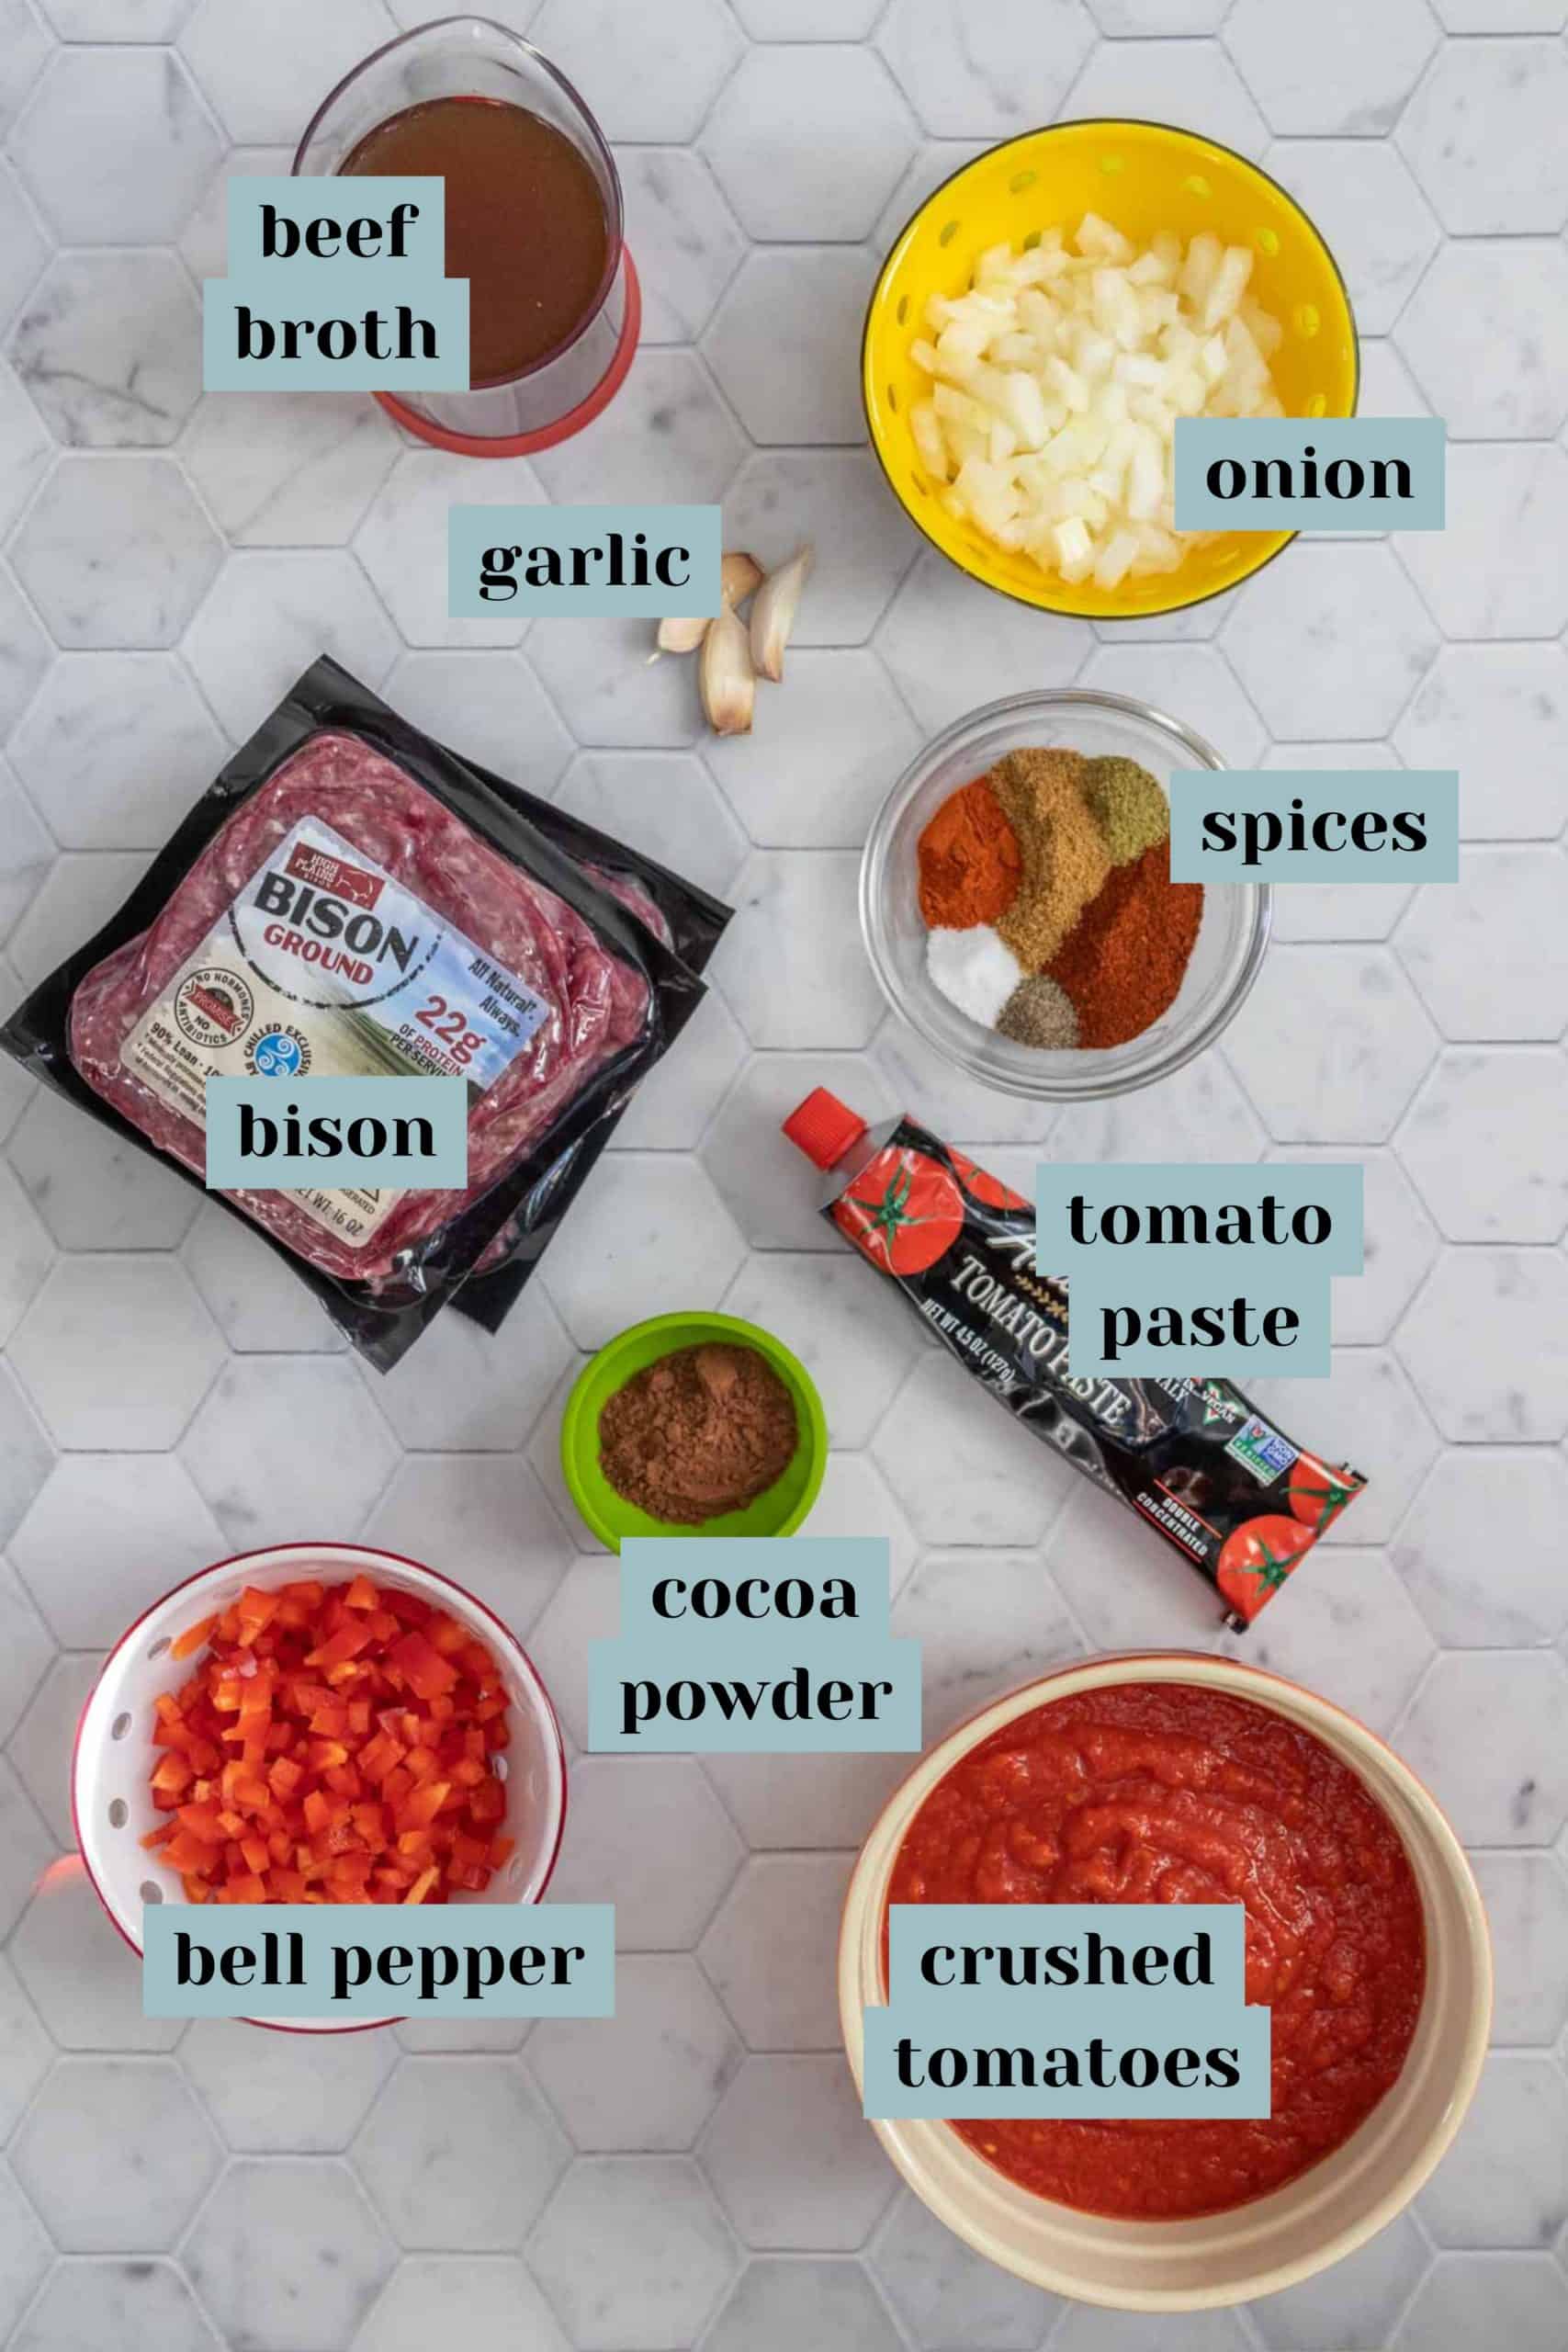 Ingredients for bison chili on a tile surface with labels.